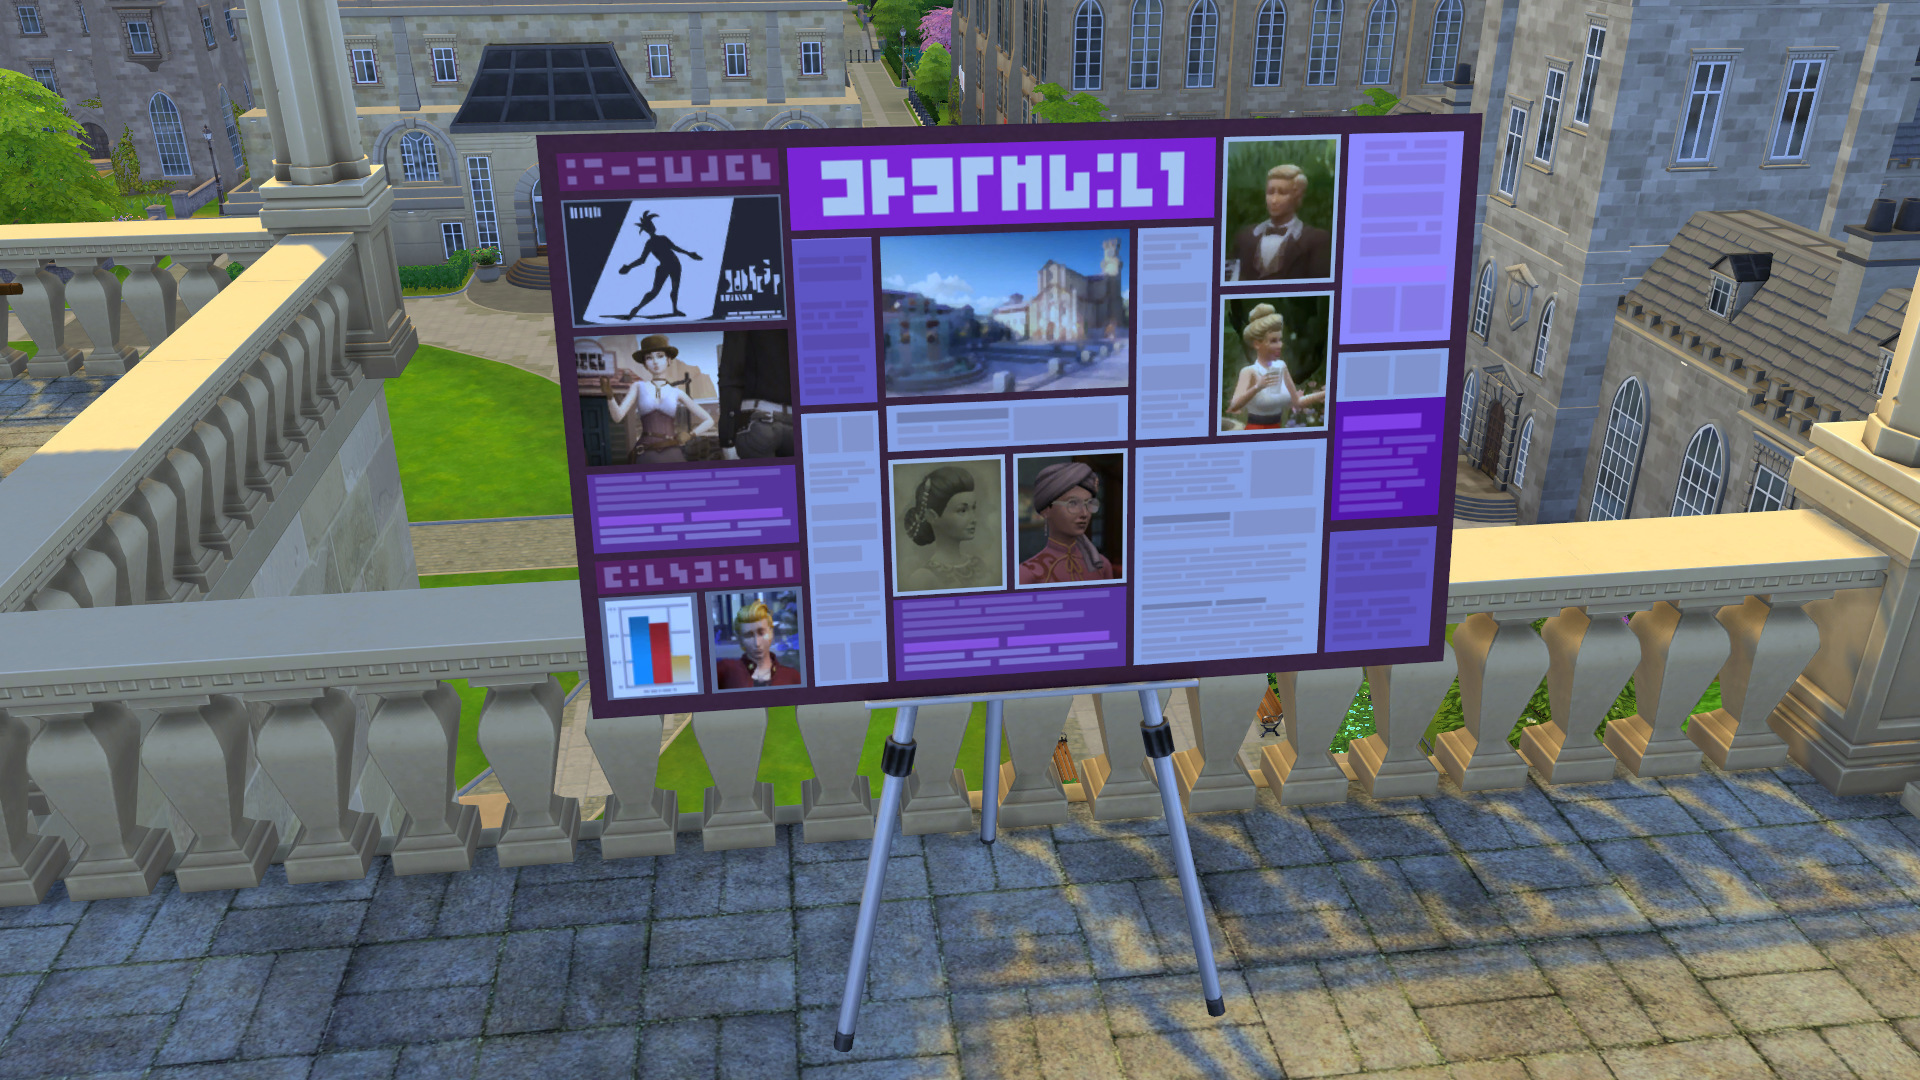 how to buy a presentation board sims 4